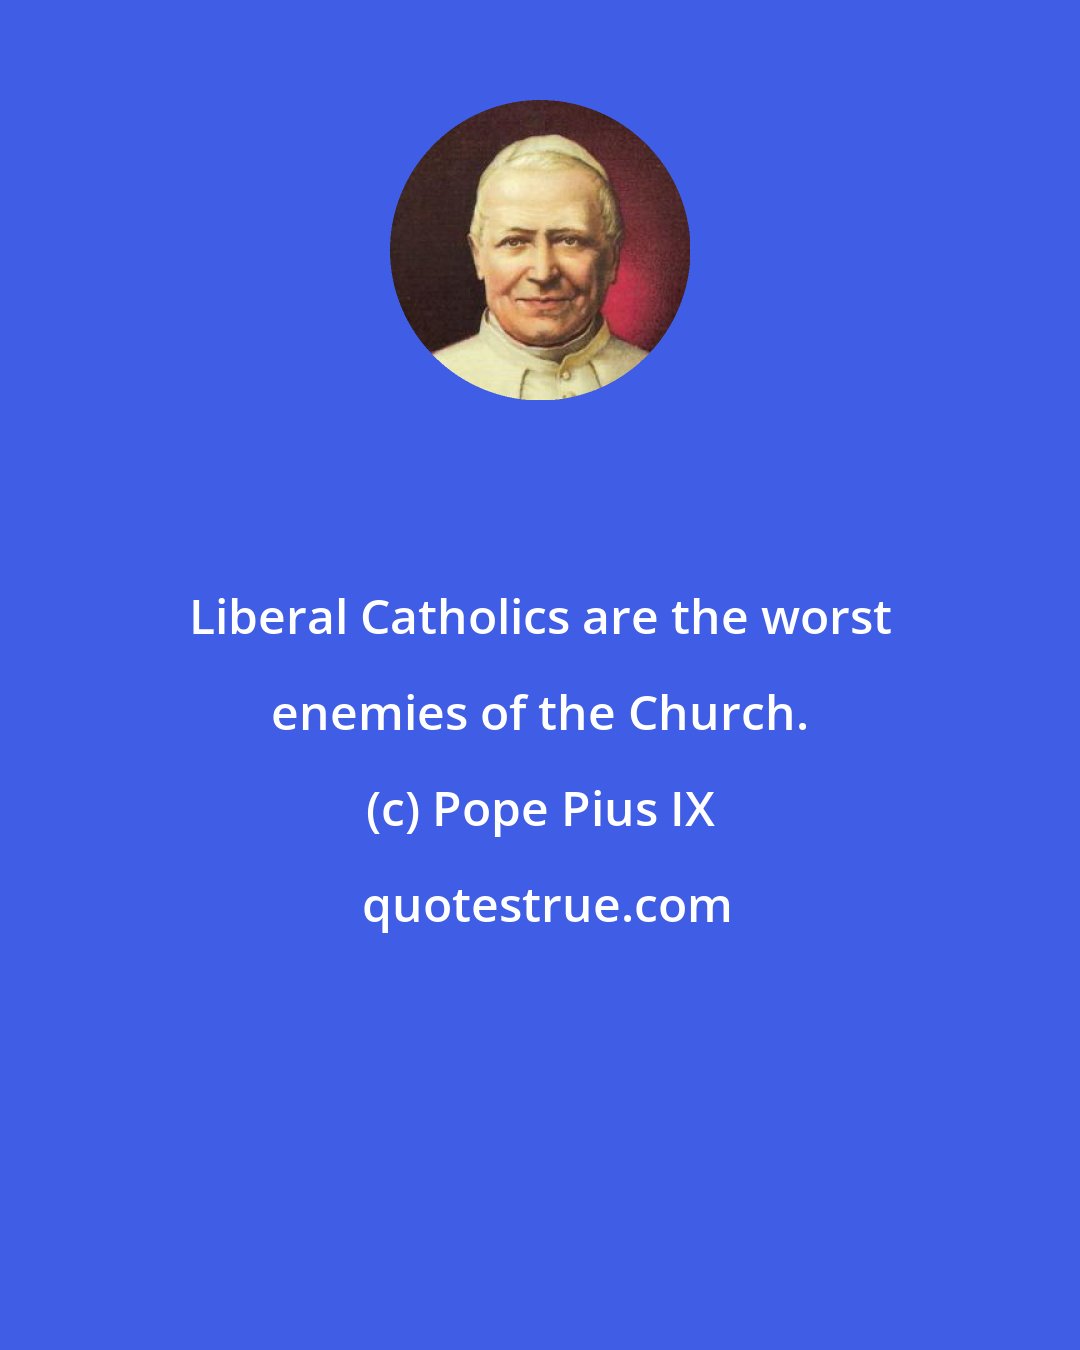 Pope Pius IX: Liberal Catholics are the worst enemies of the Church.